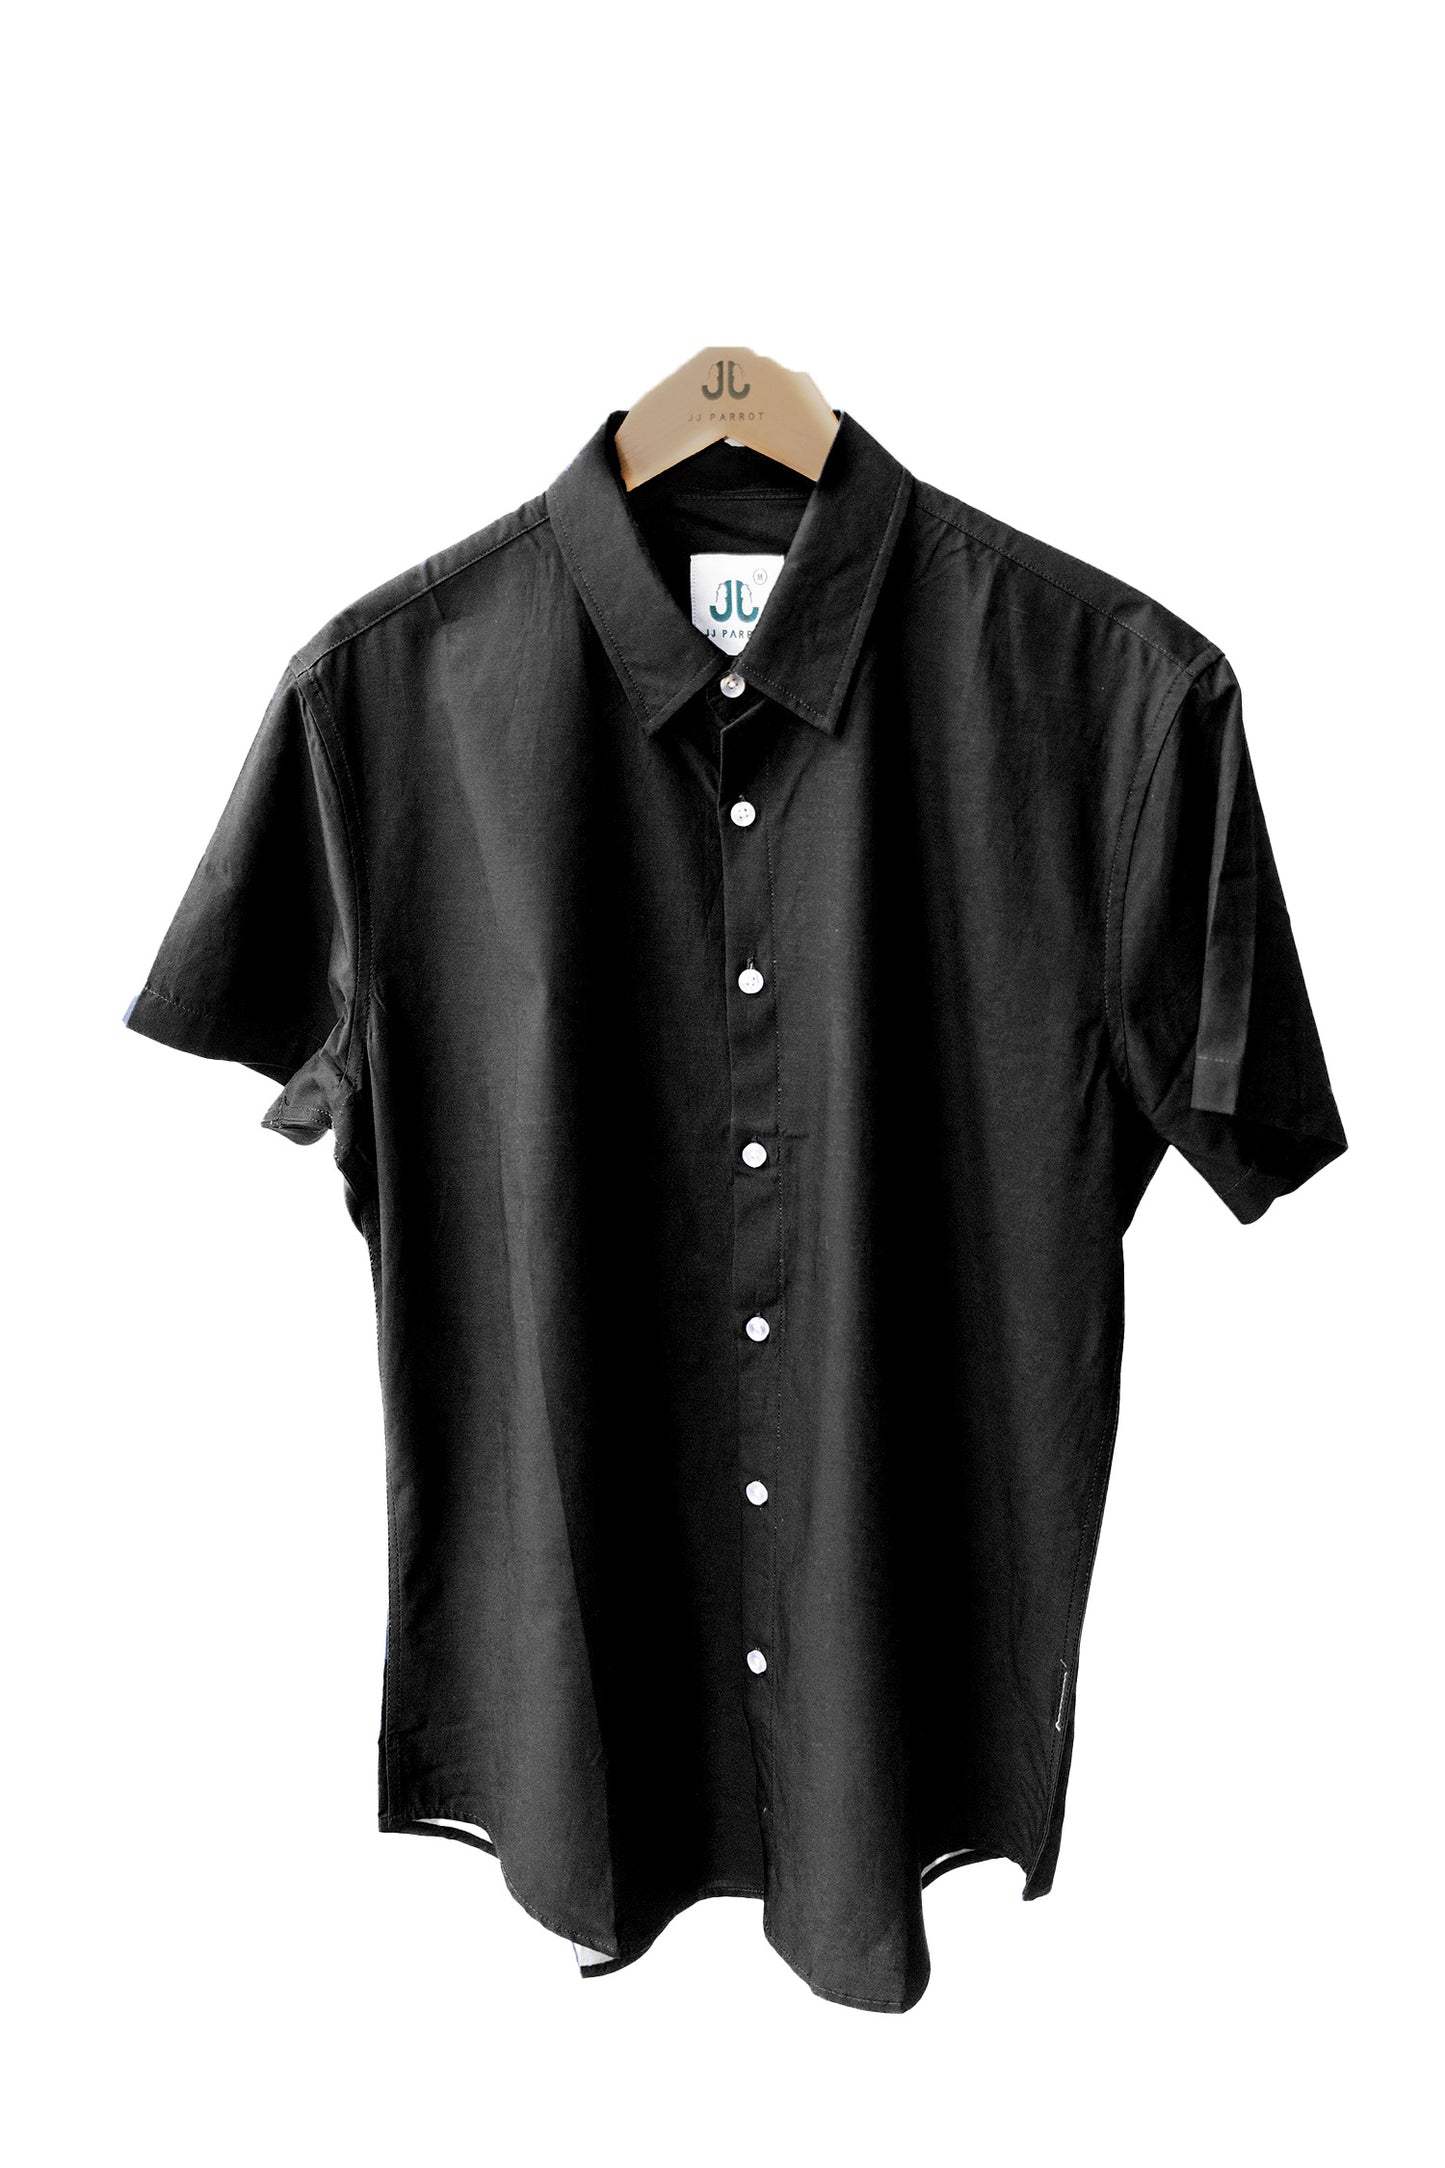 Solid Black Short Sleeve Button Down